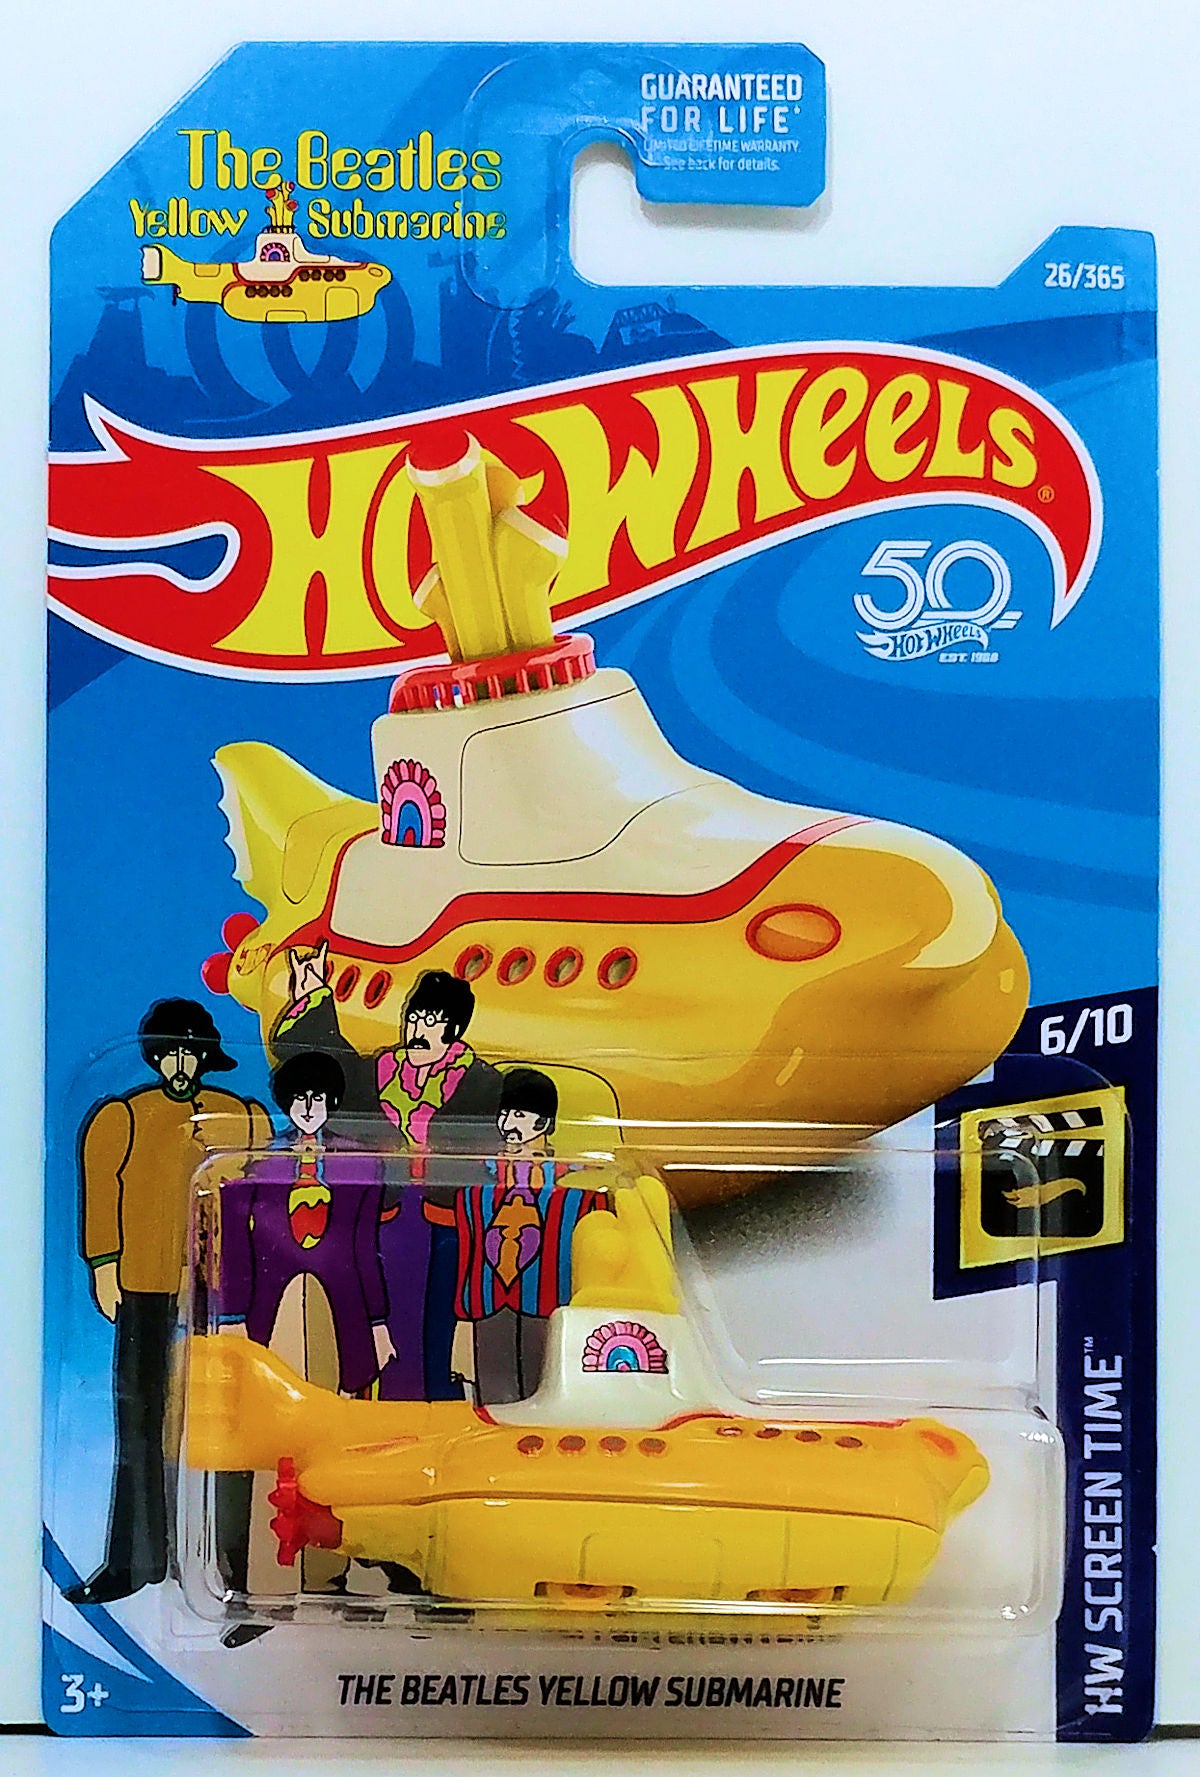 Hot Wheels 2018 - Collector # 026/365 - HW Screen Time 6/10 - The Beatles Yellow Submarine - Yellow / Various Graphics - USA 50th Card